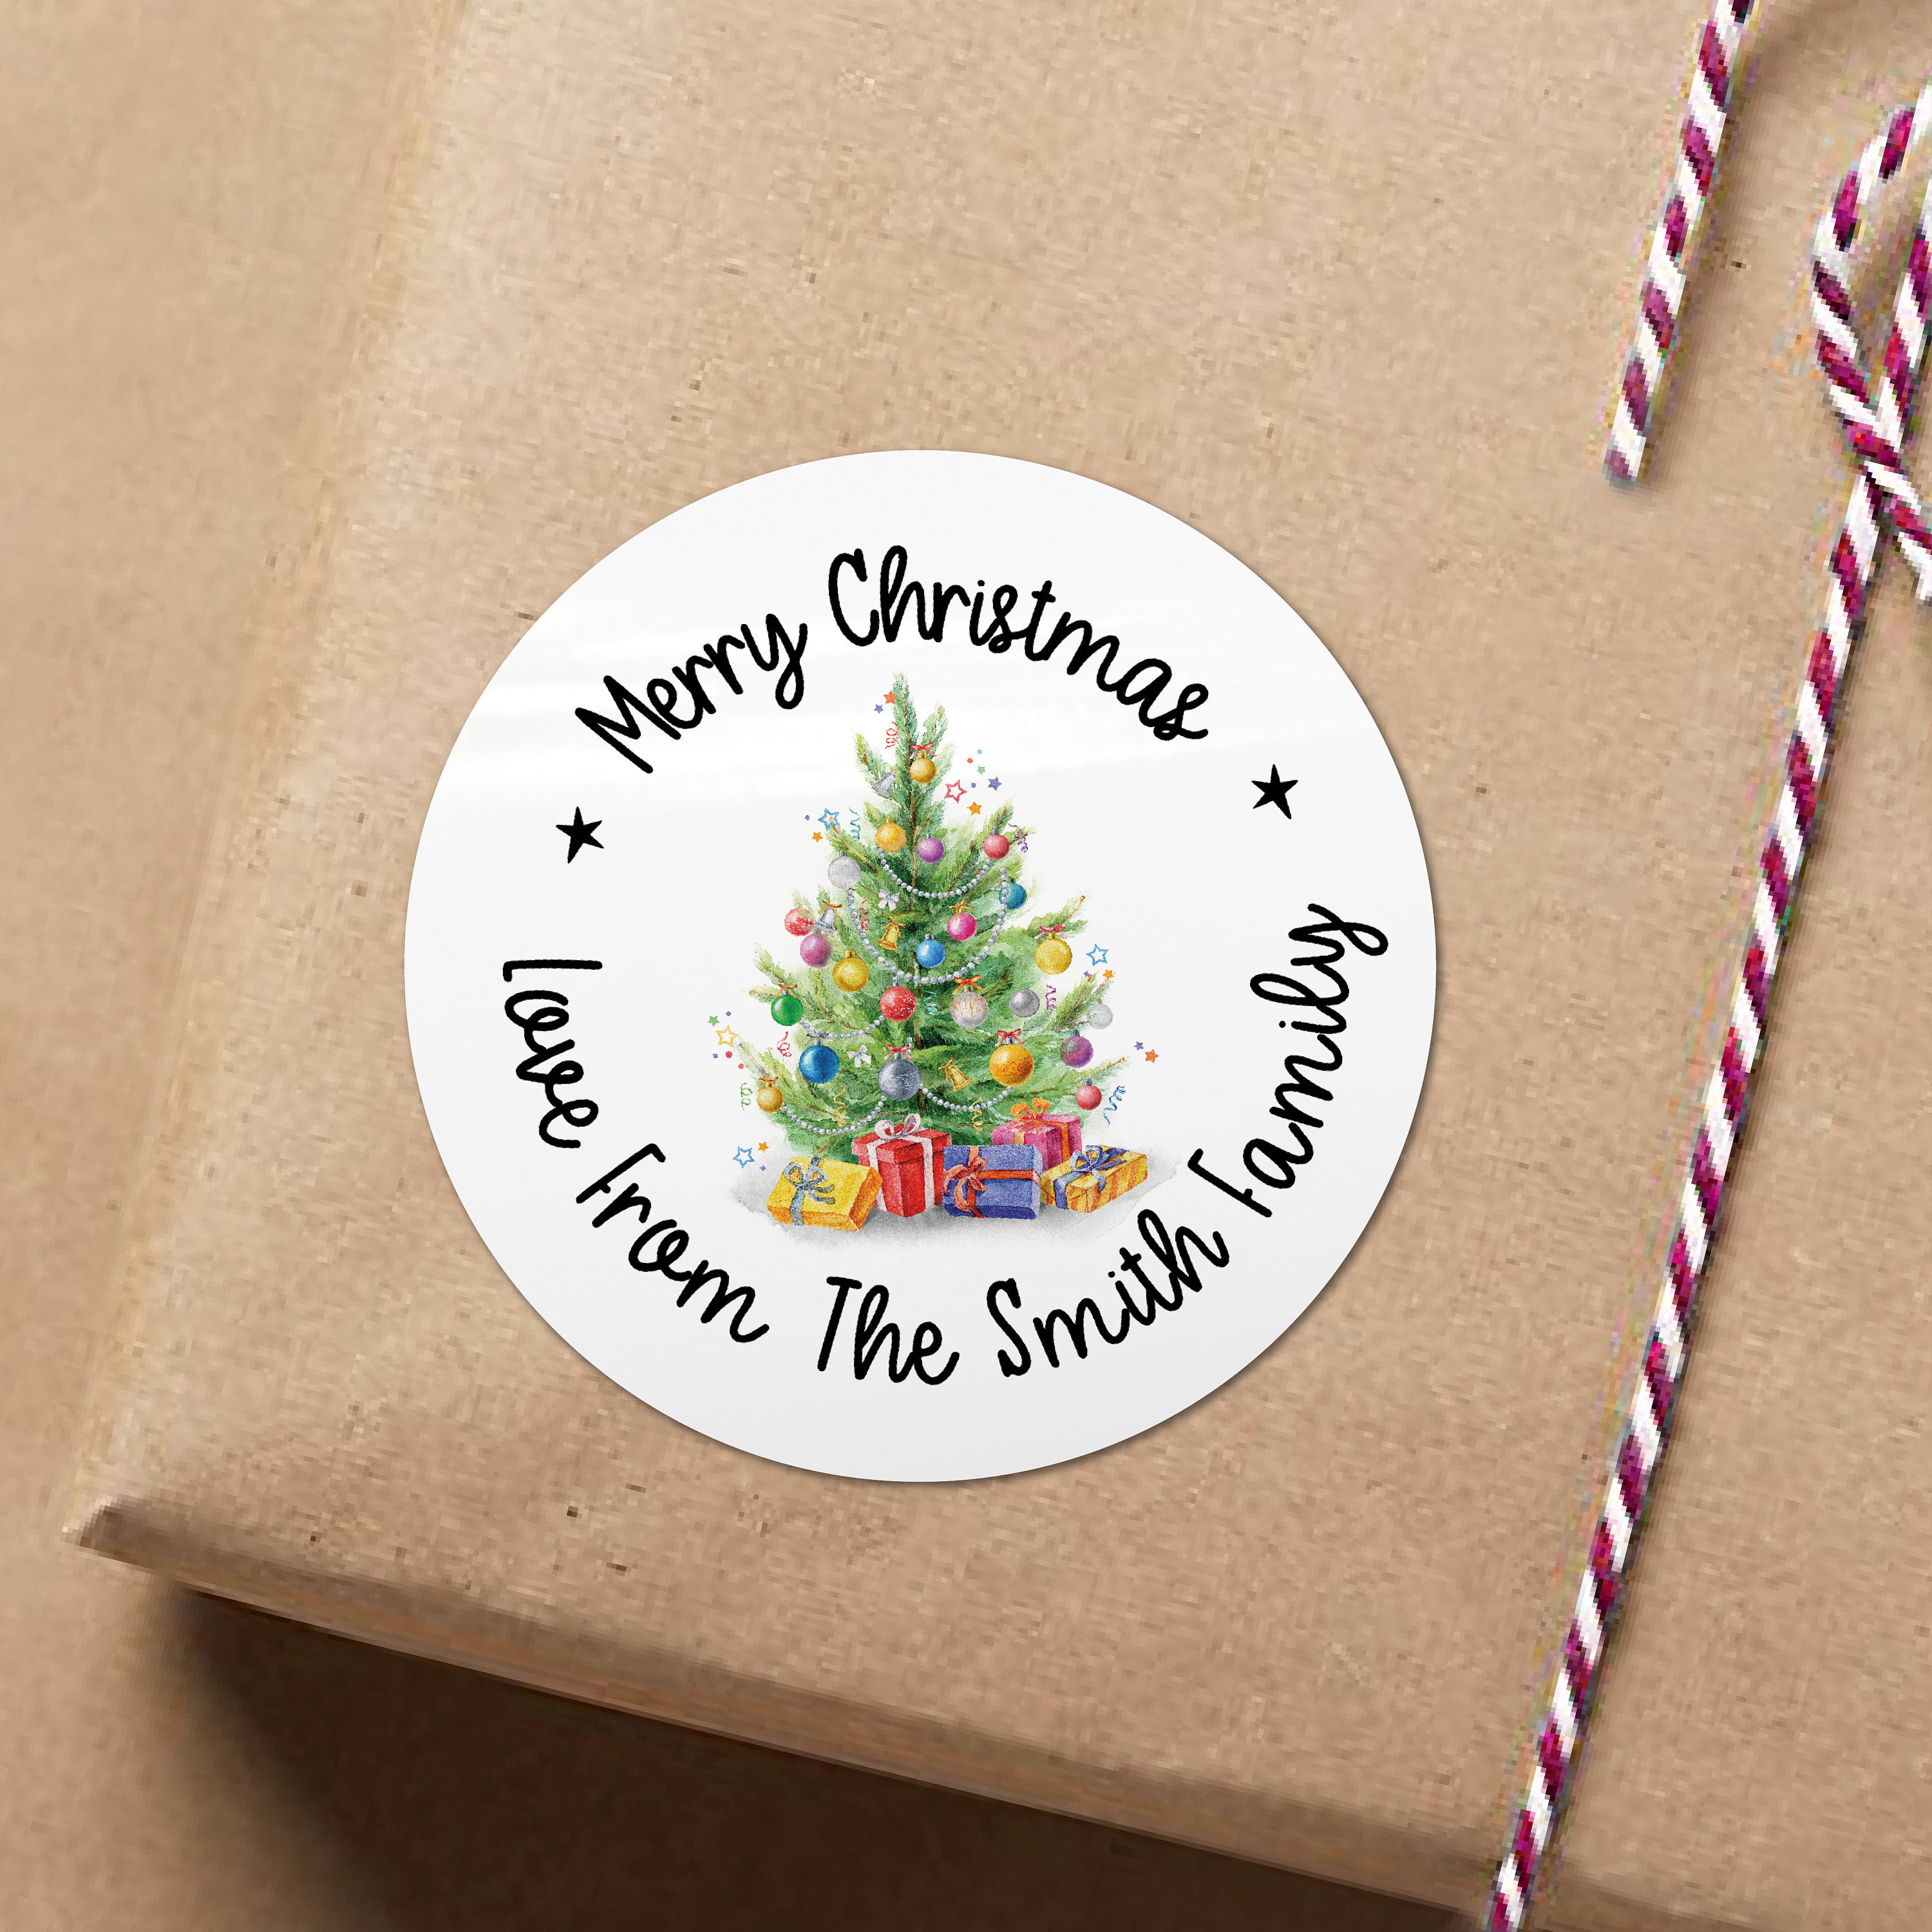 Merry Christmas Stickers Printed Stickers With Custom Christmas Name s Christmas Gift Wrapping Ideas Personalised Name Stickers